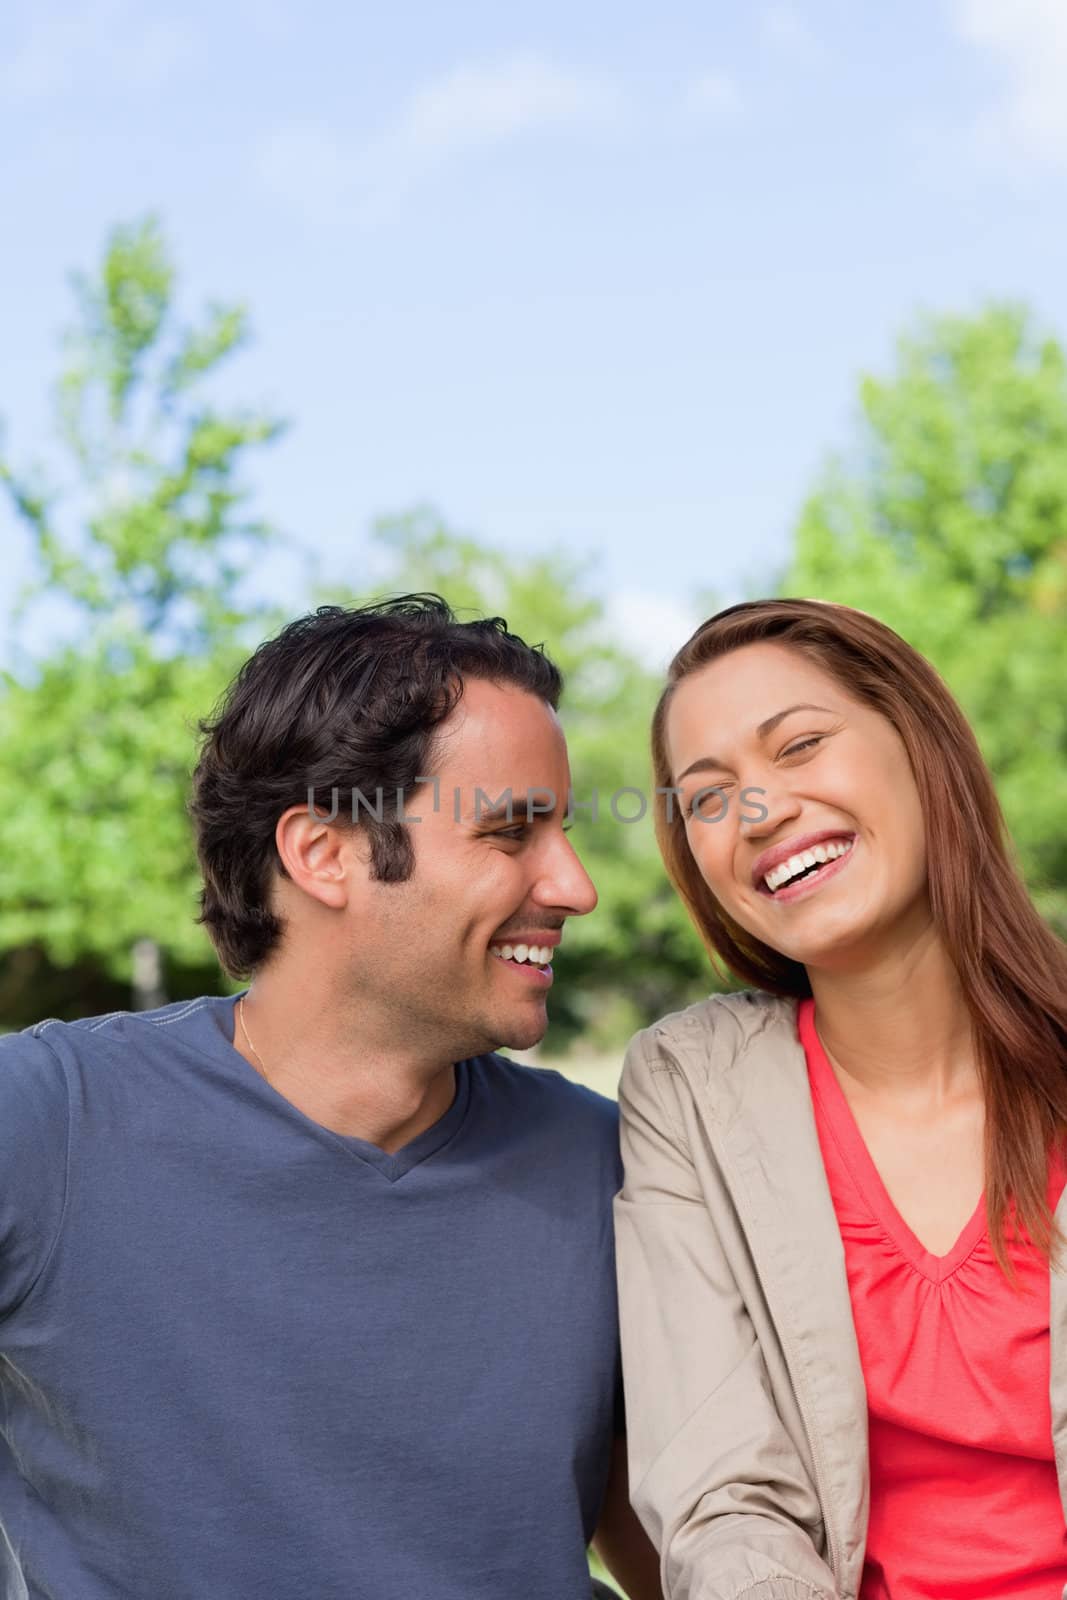 Man looking his friend as she is laughing joyfully while sitting by Wavebreakmedia